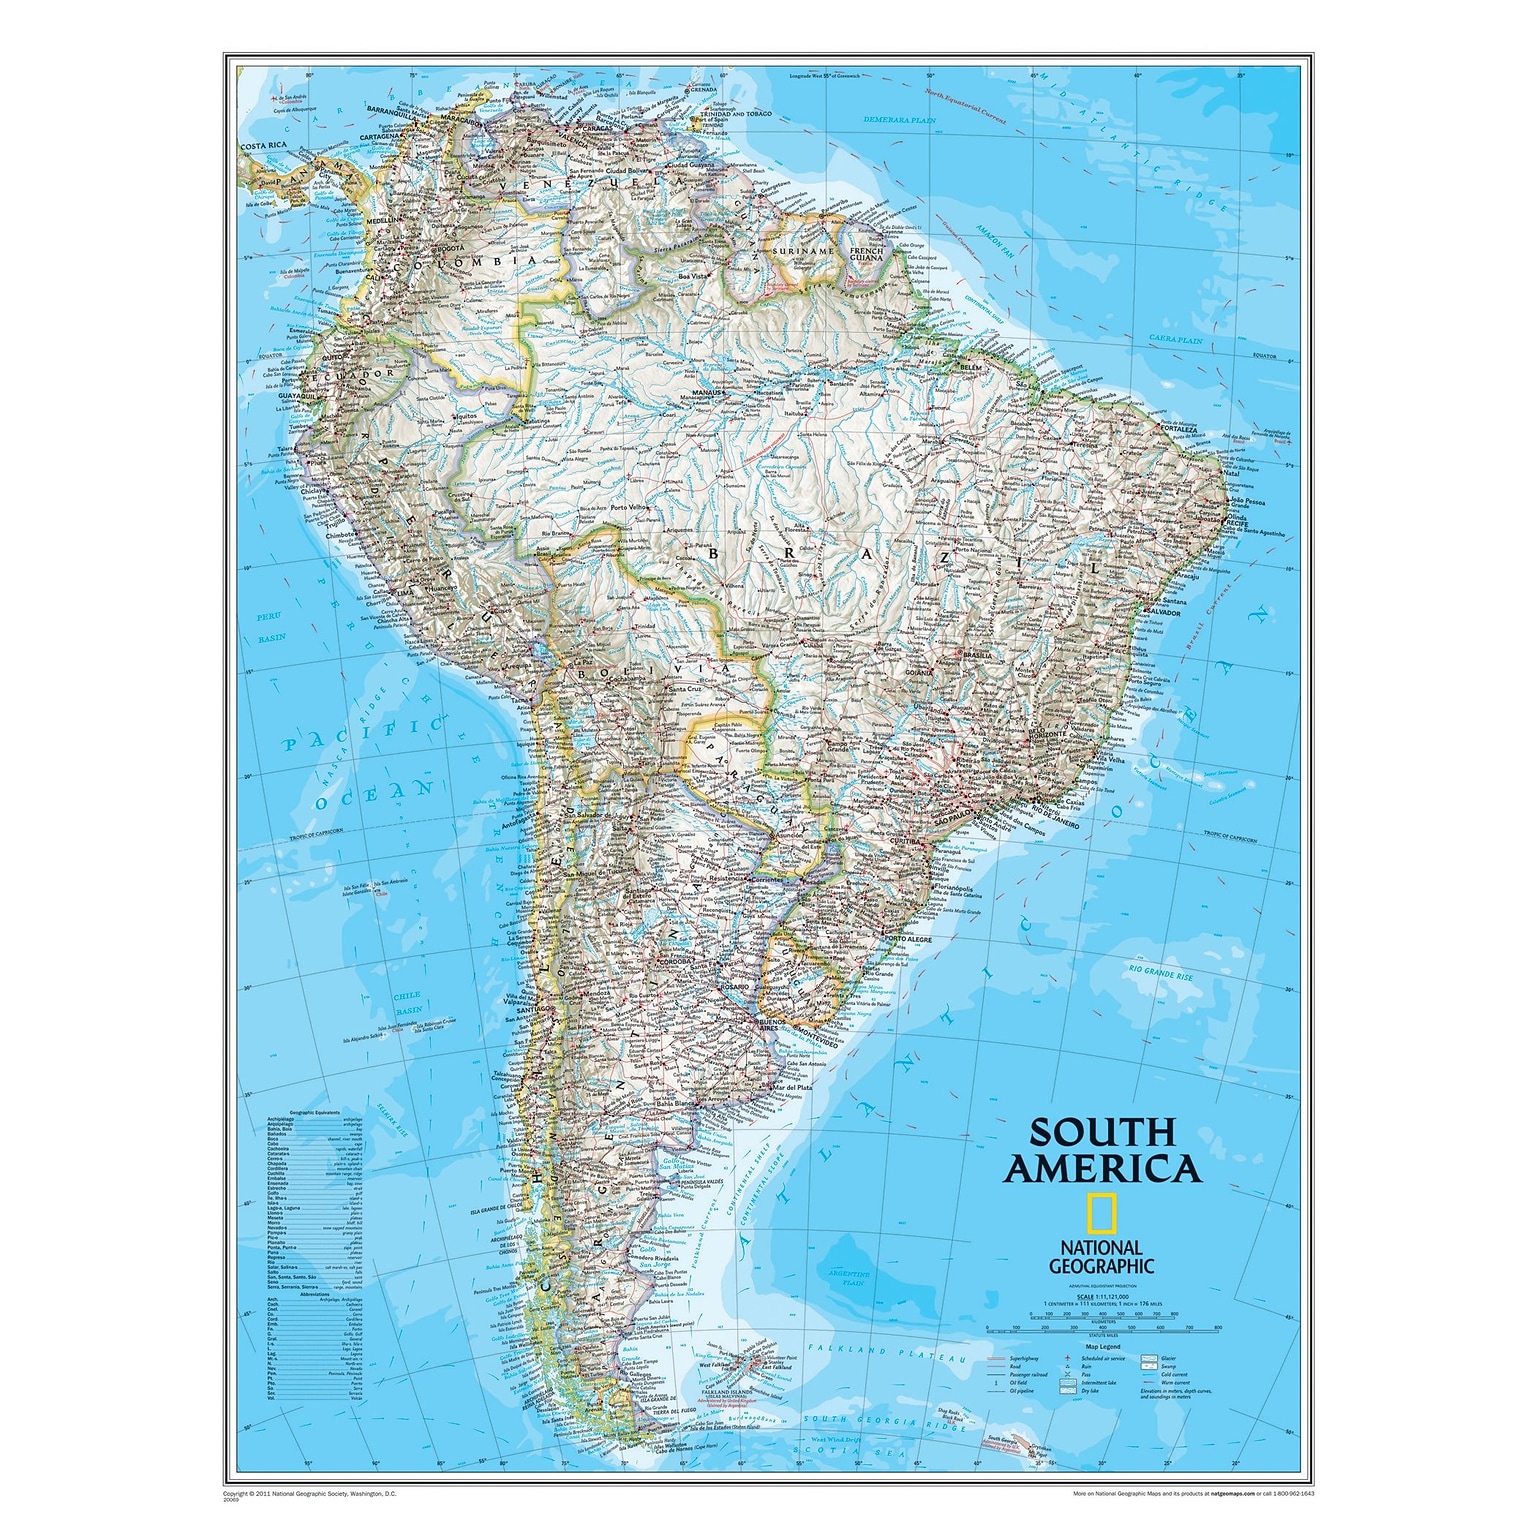 National Geographic Maps South America Wall Map, 24 x 30